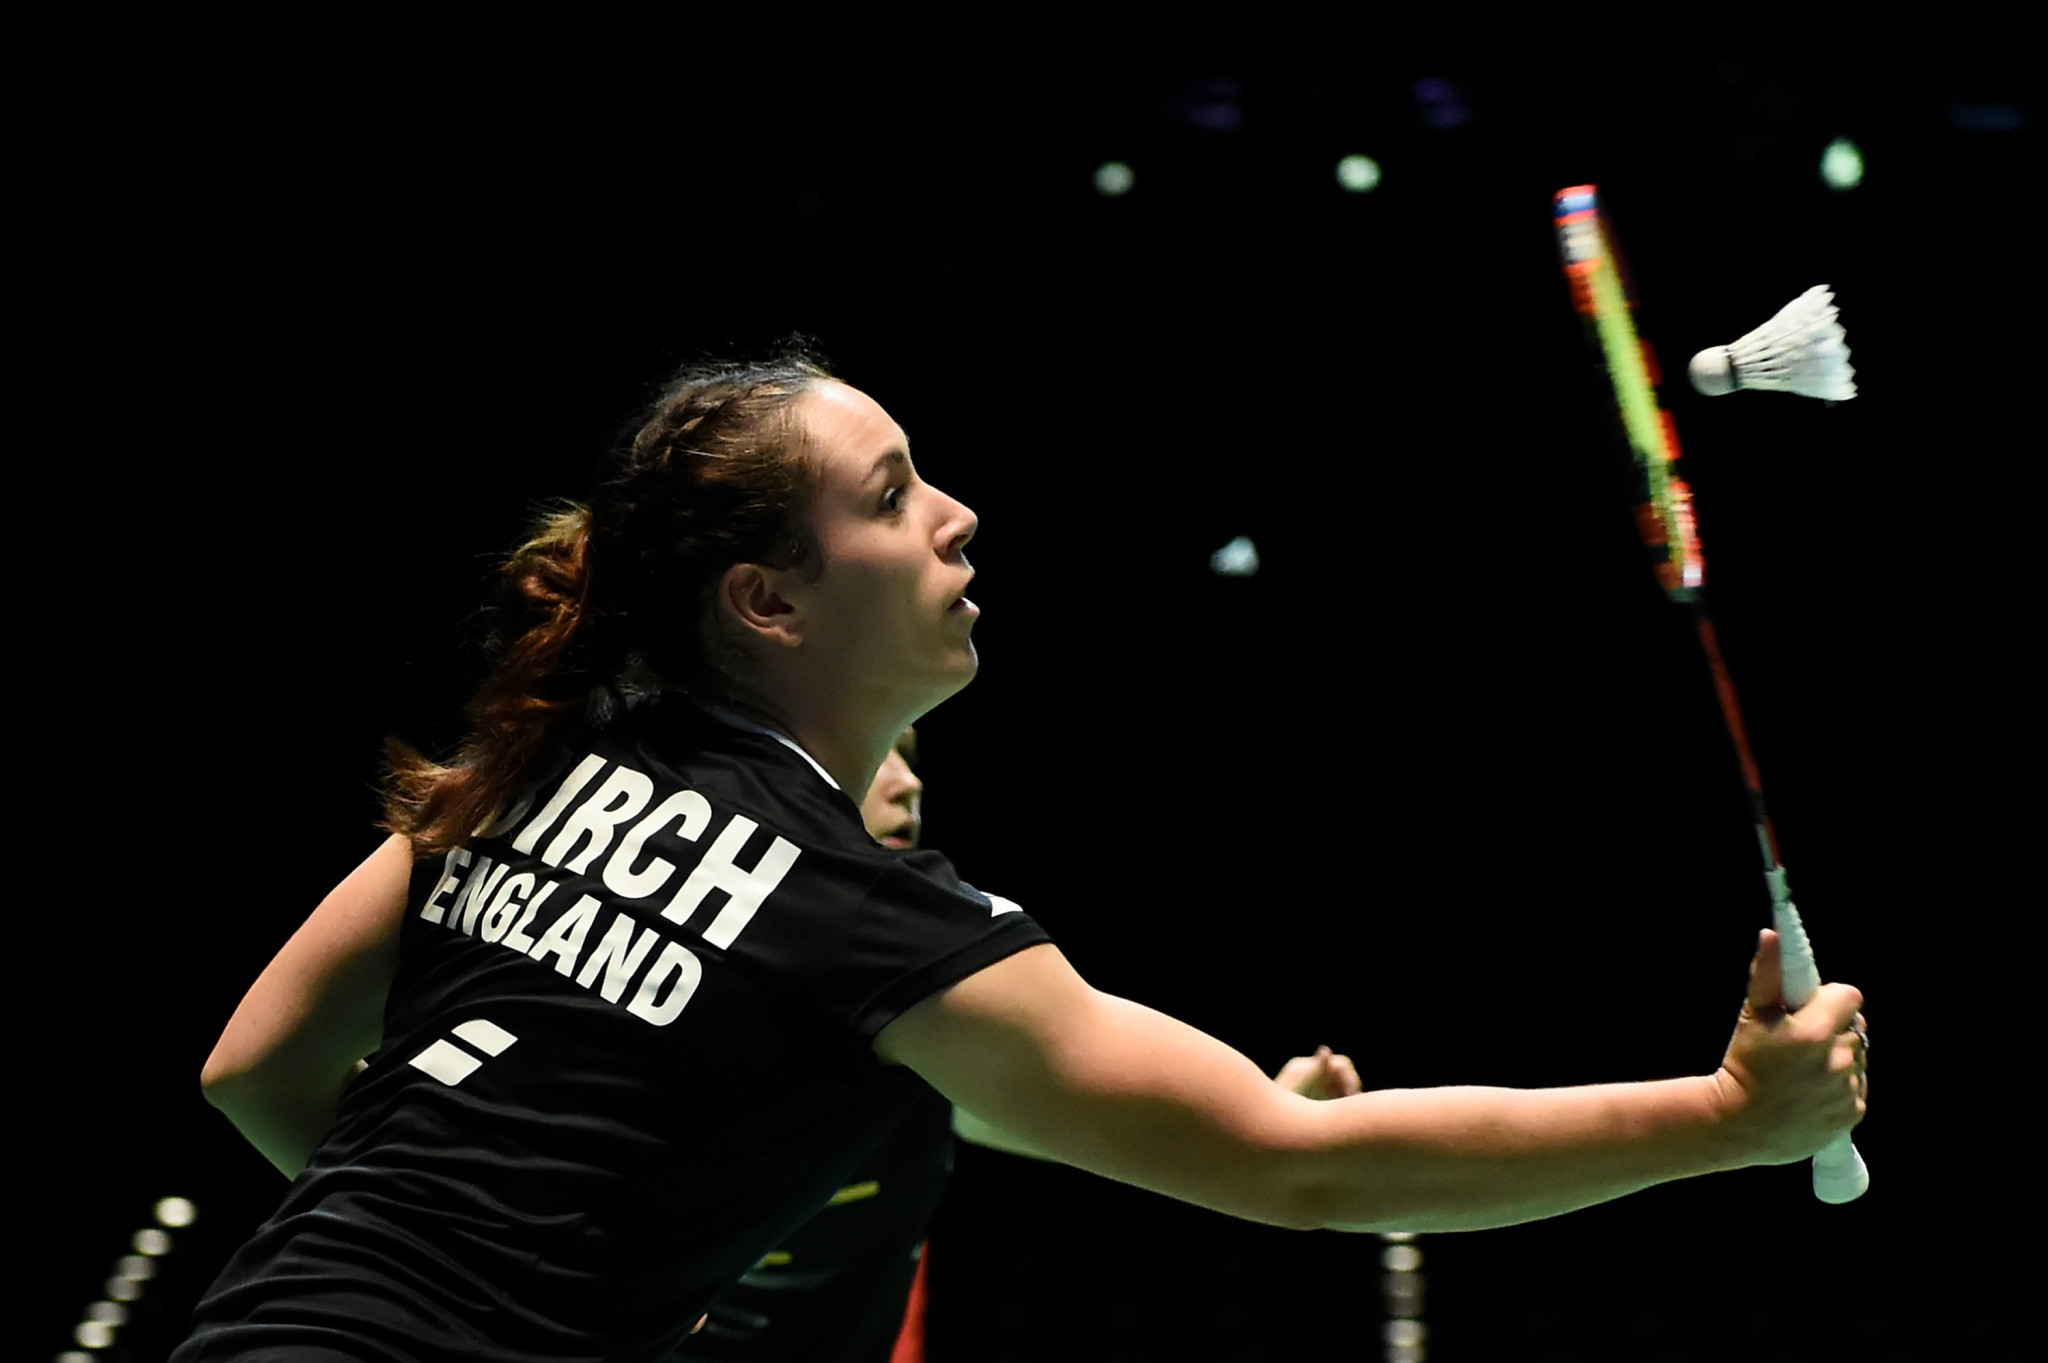 Chloe Birch, pictured here in doubles action, is likely to be one of the home favourites ahead of next year's Championships ©Getty Images